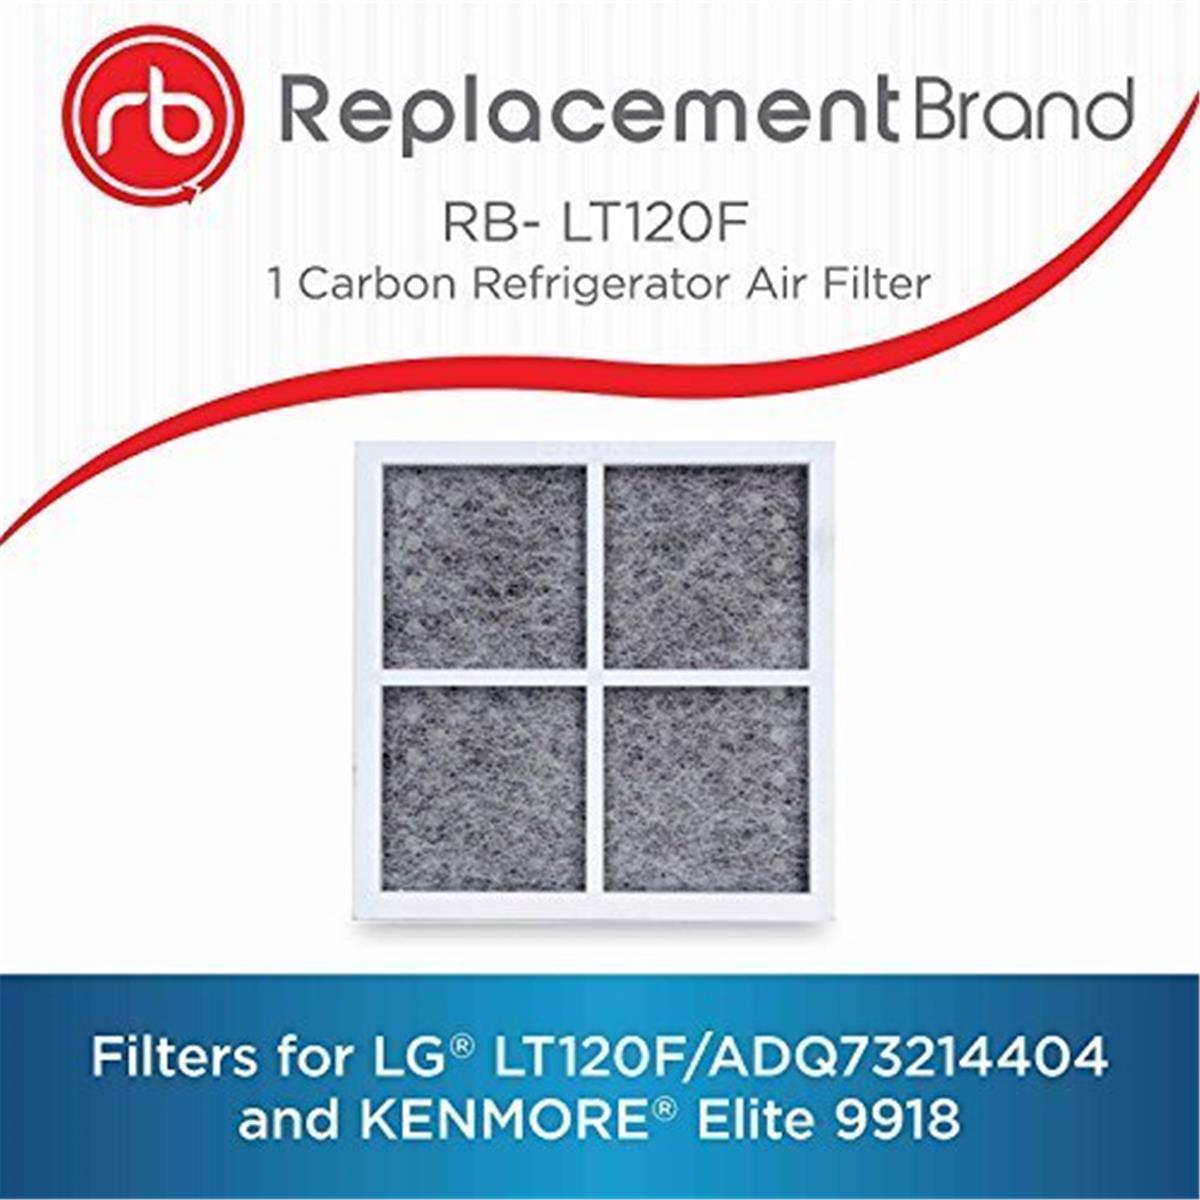 RB-L4 Replacement Brand Refrigerator Air Filter for LG LT120F & ADQ73214404 -  Commercial Water Distributing